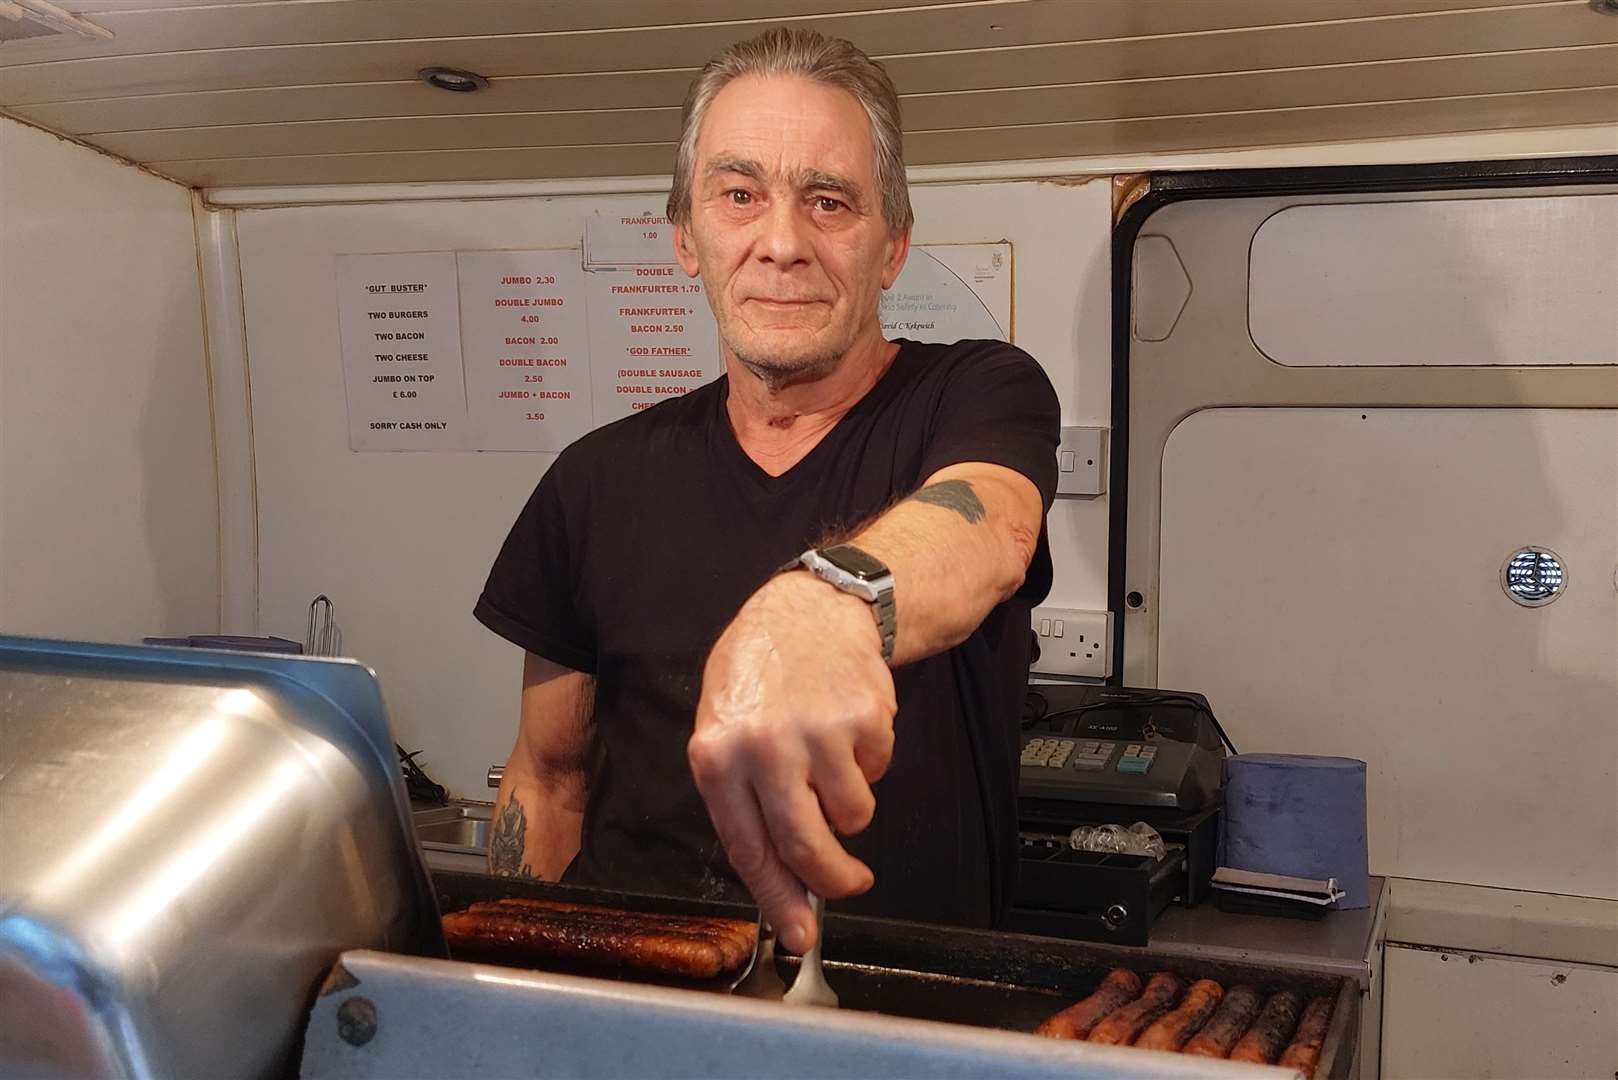 Food van owner Dave Kekewich is calling for better signs